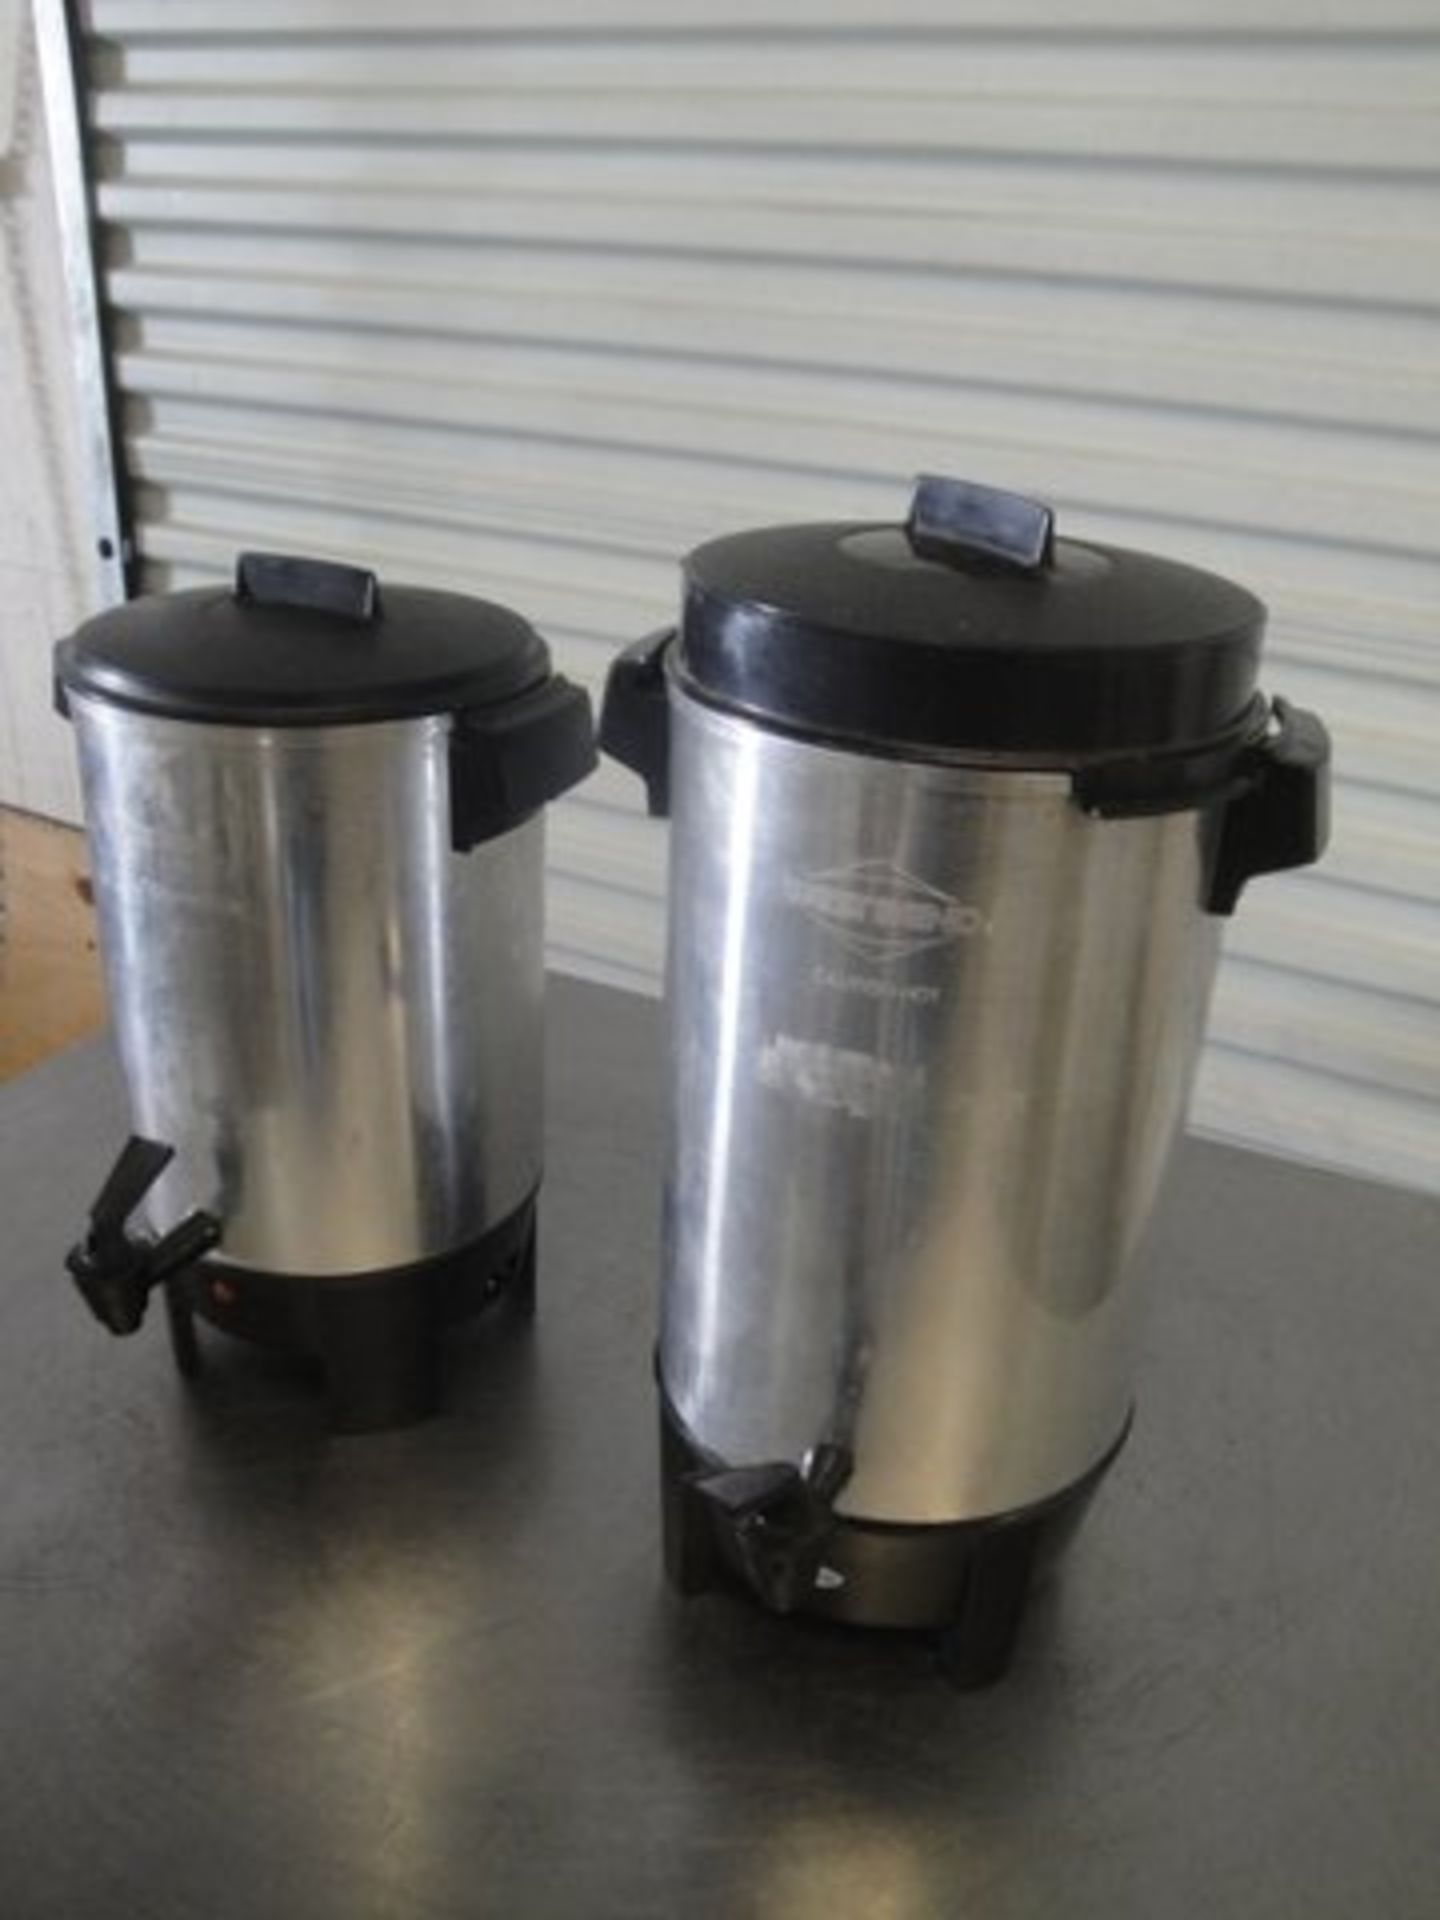 WESTBEND STAINLESS STEEL ELECTRIC PERCOLATOR LOT. - Image 3 of 4